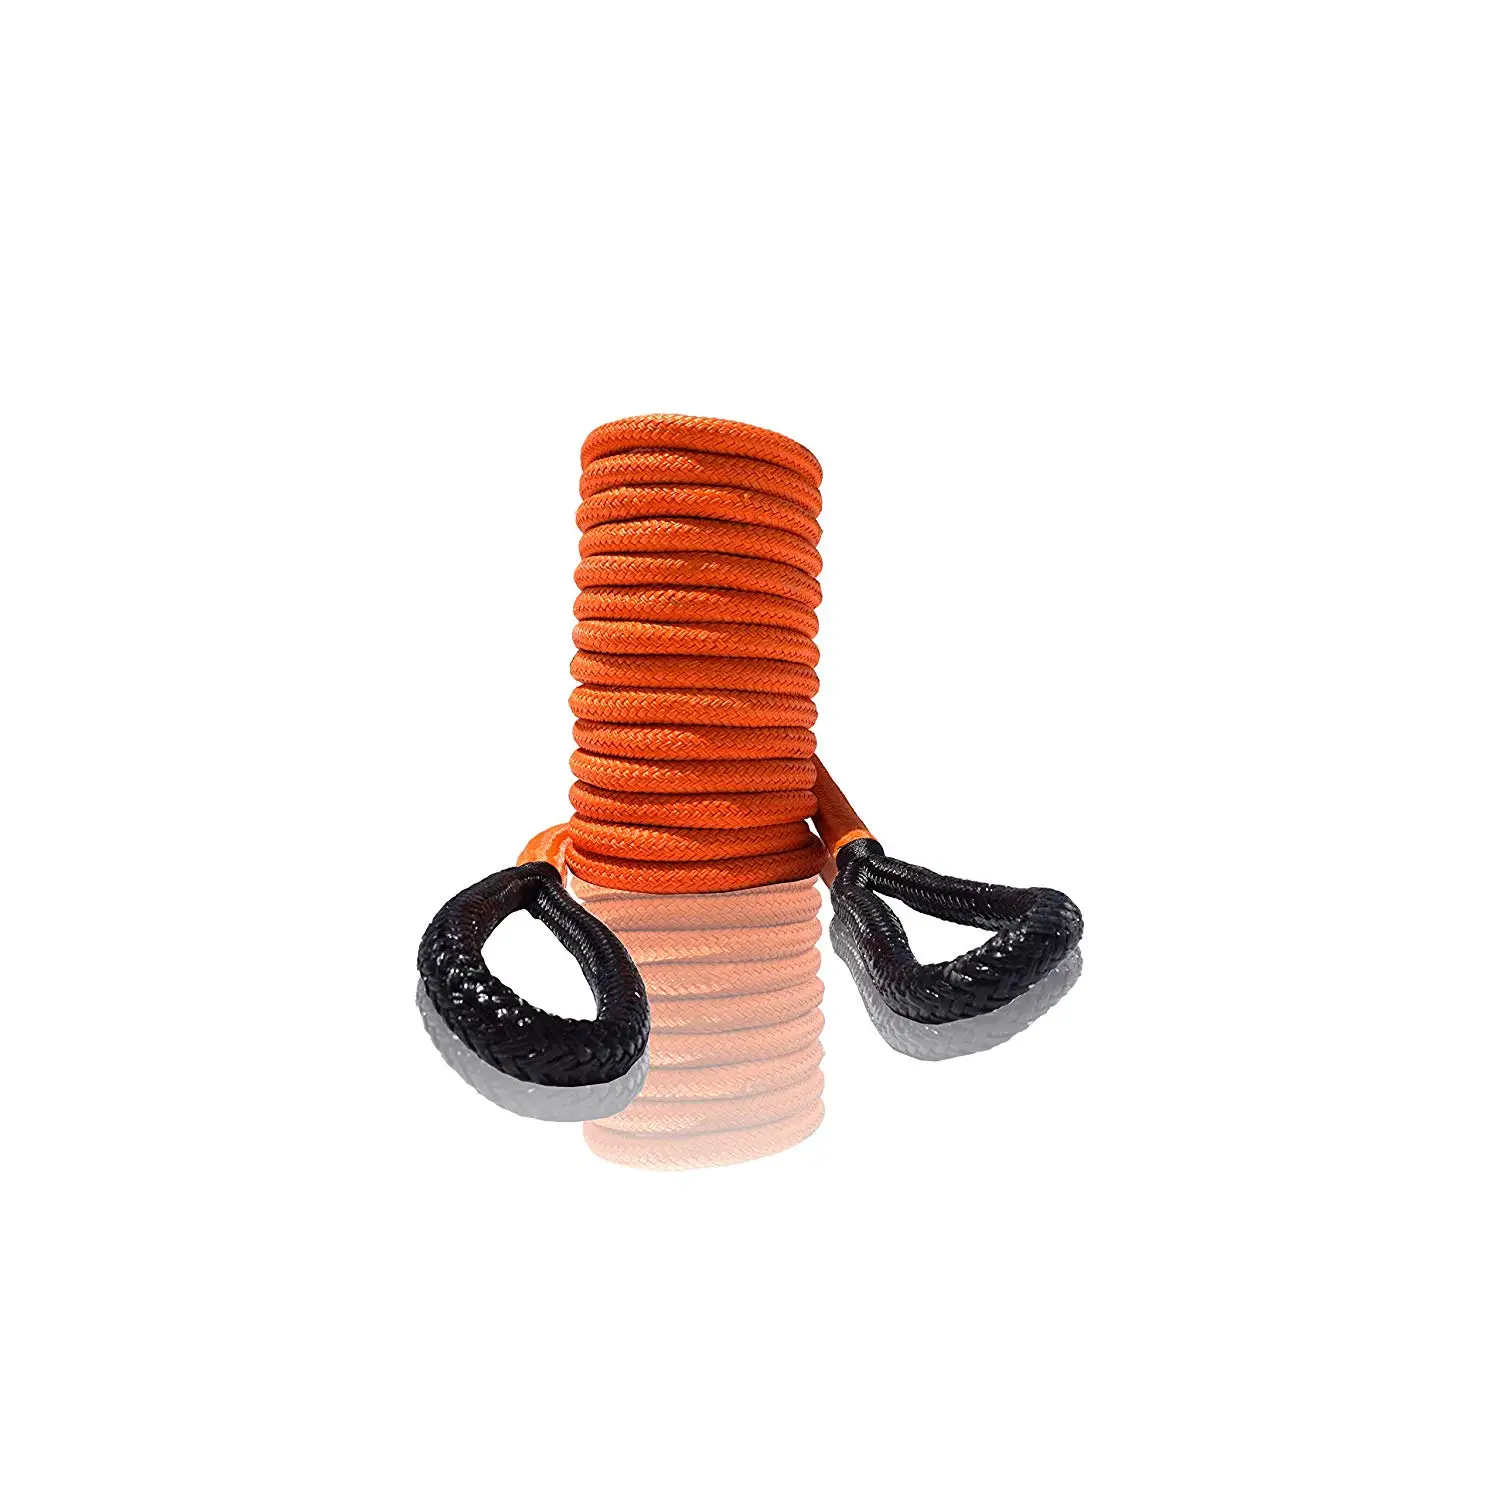 Cheap Kinetic Tow Rope, find Kinetic Tow Rope deals on line at Alibaba.com